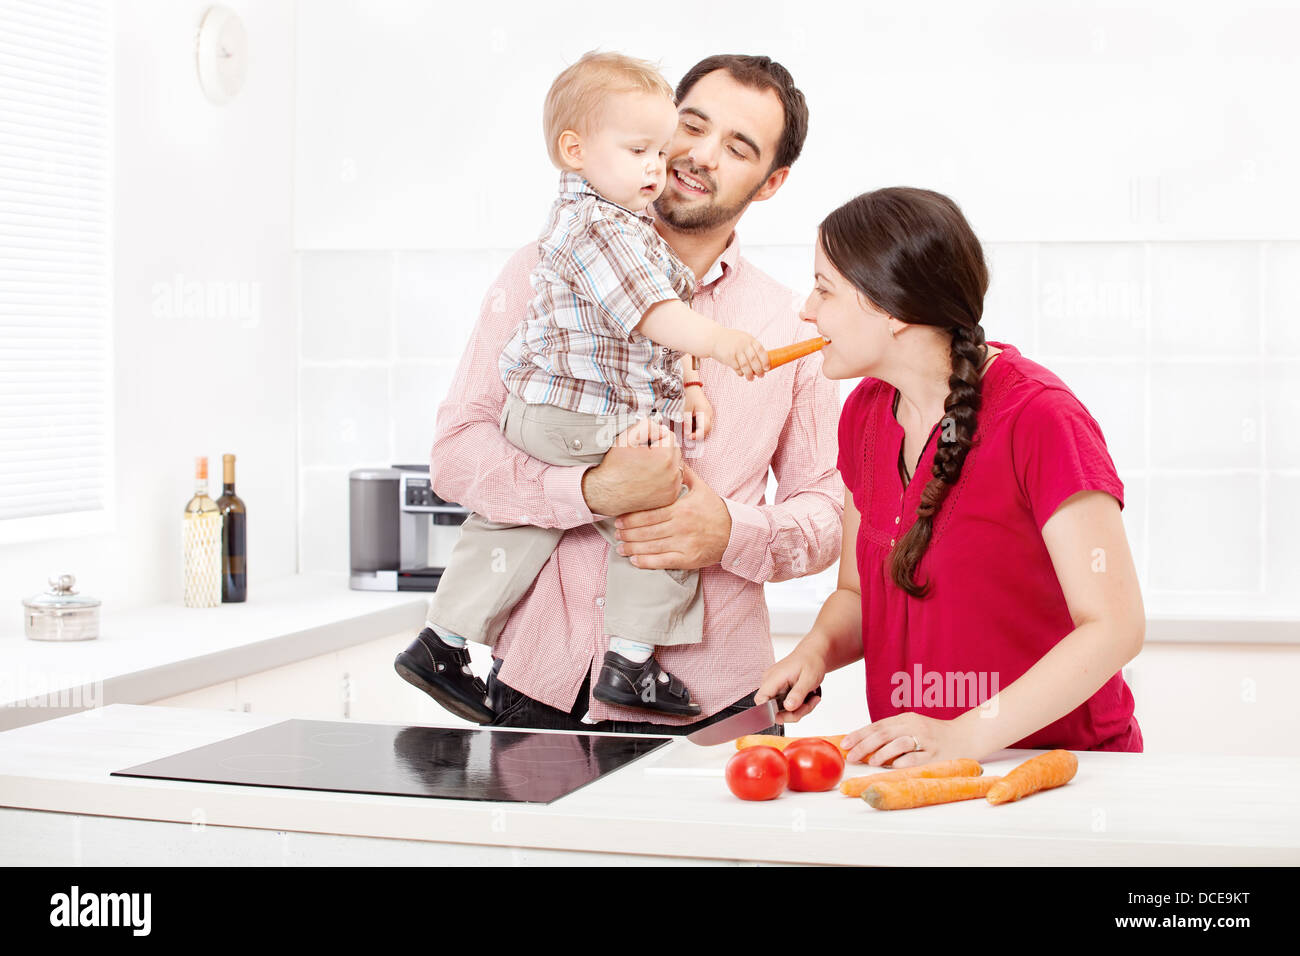 Happy family preparing food in the kitchen Stock Photo